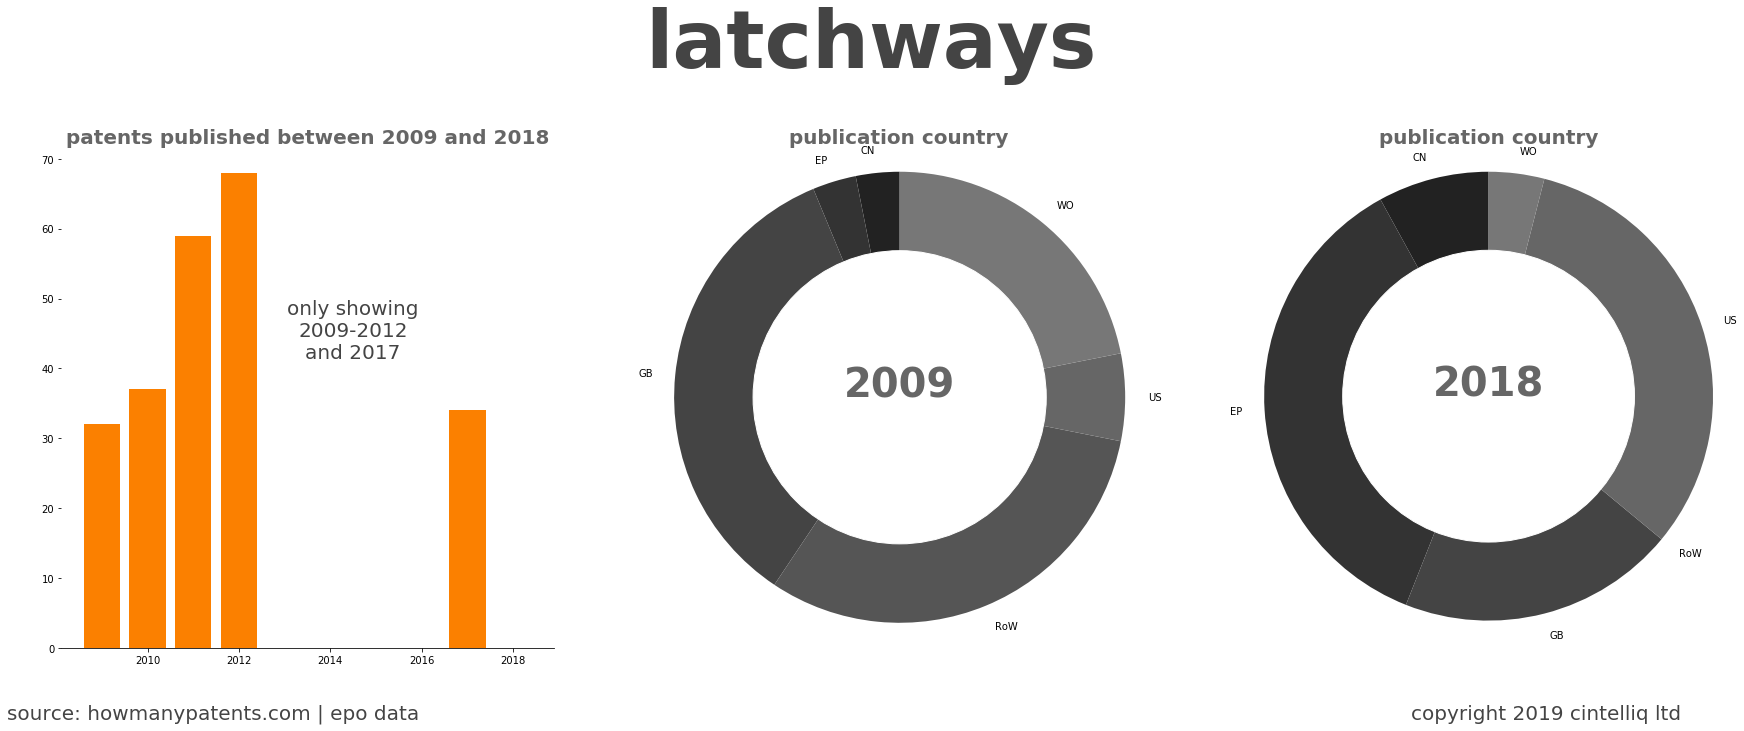 summary of patents for Latchways